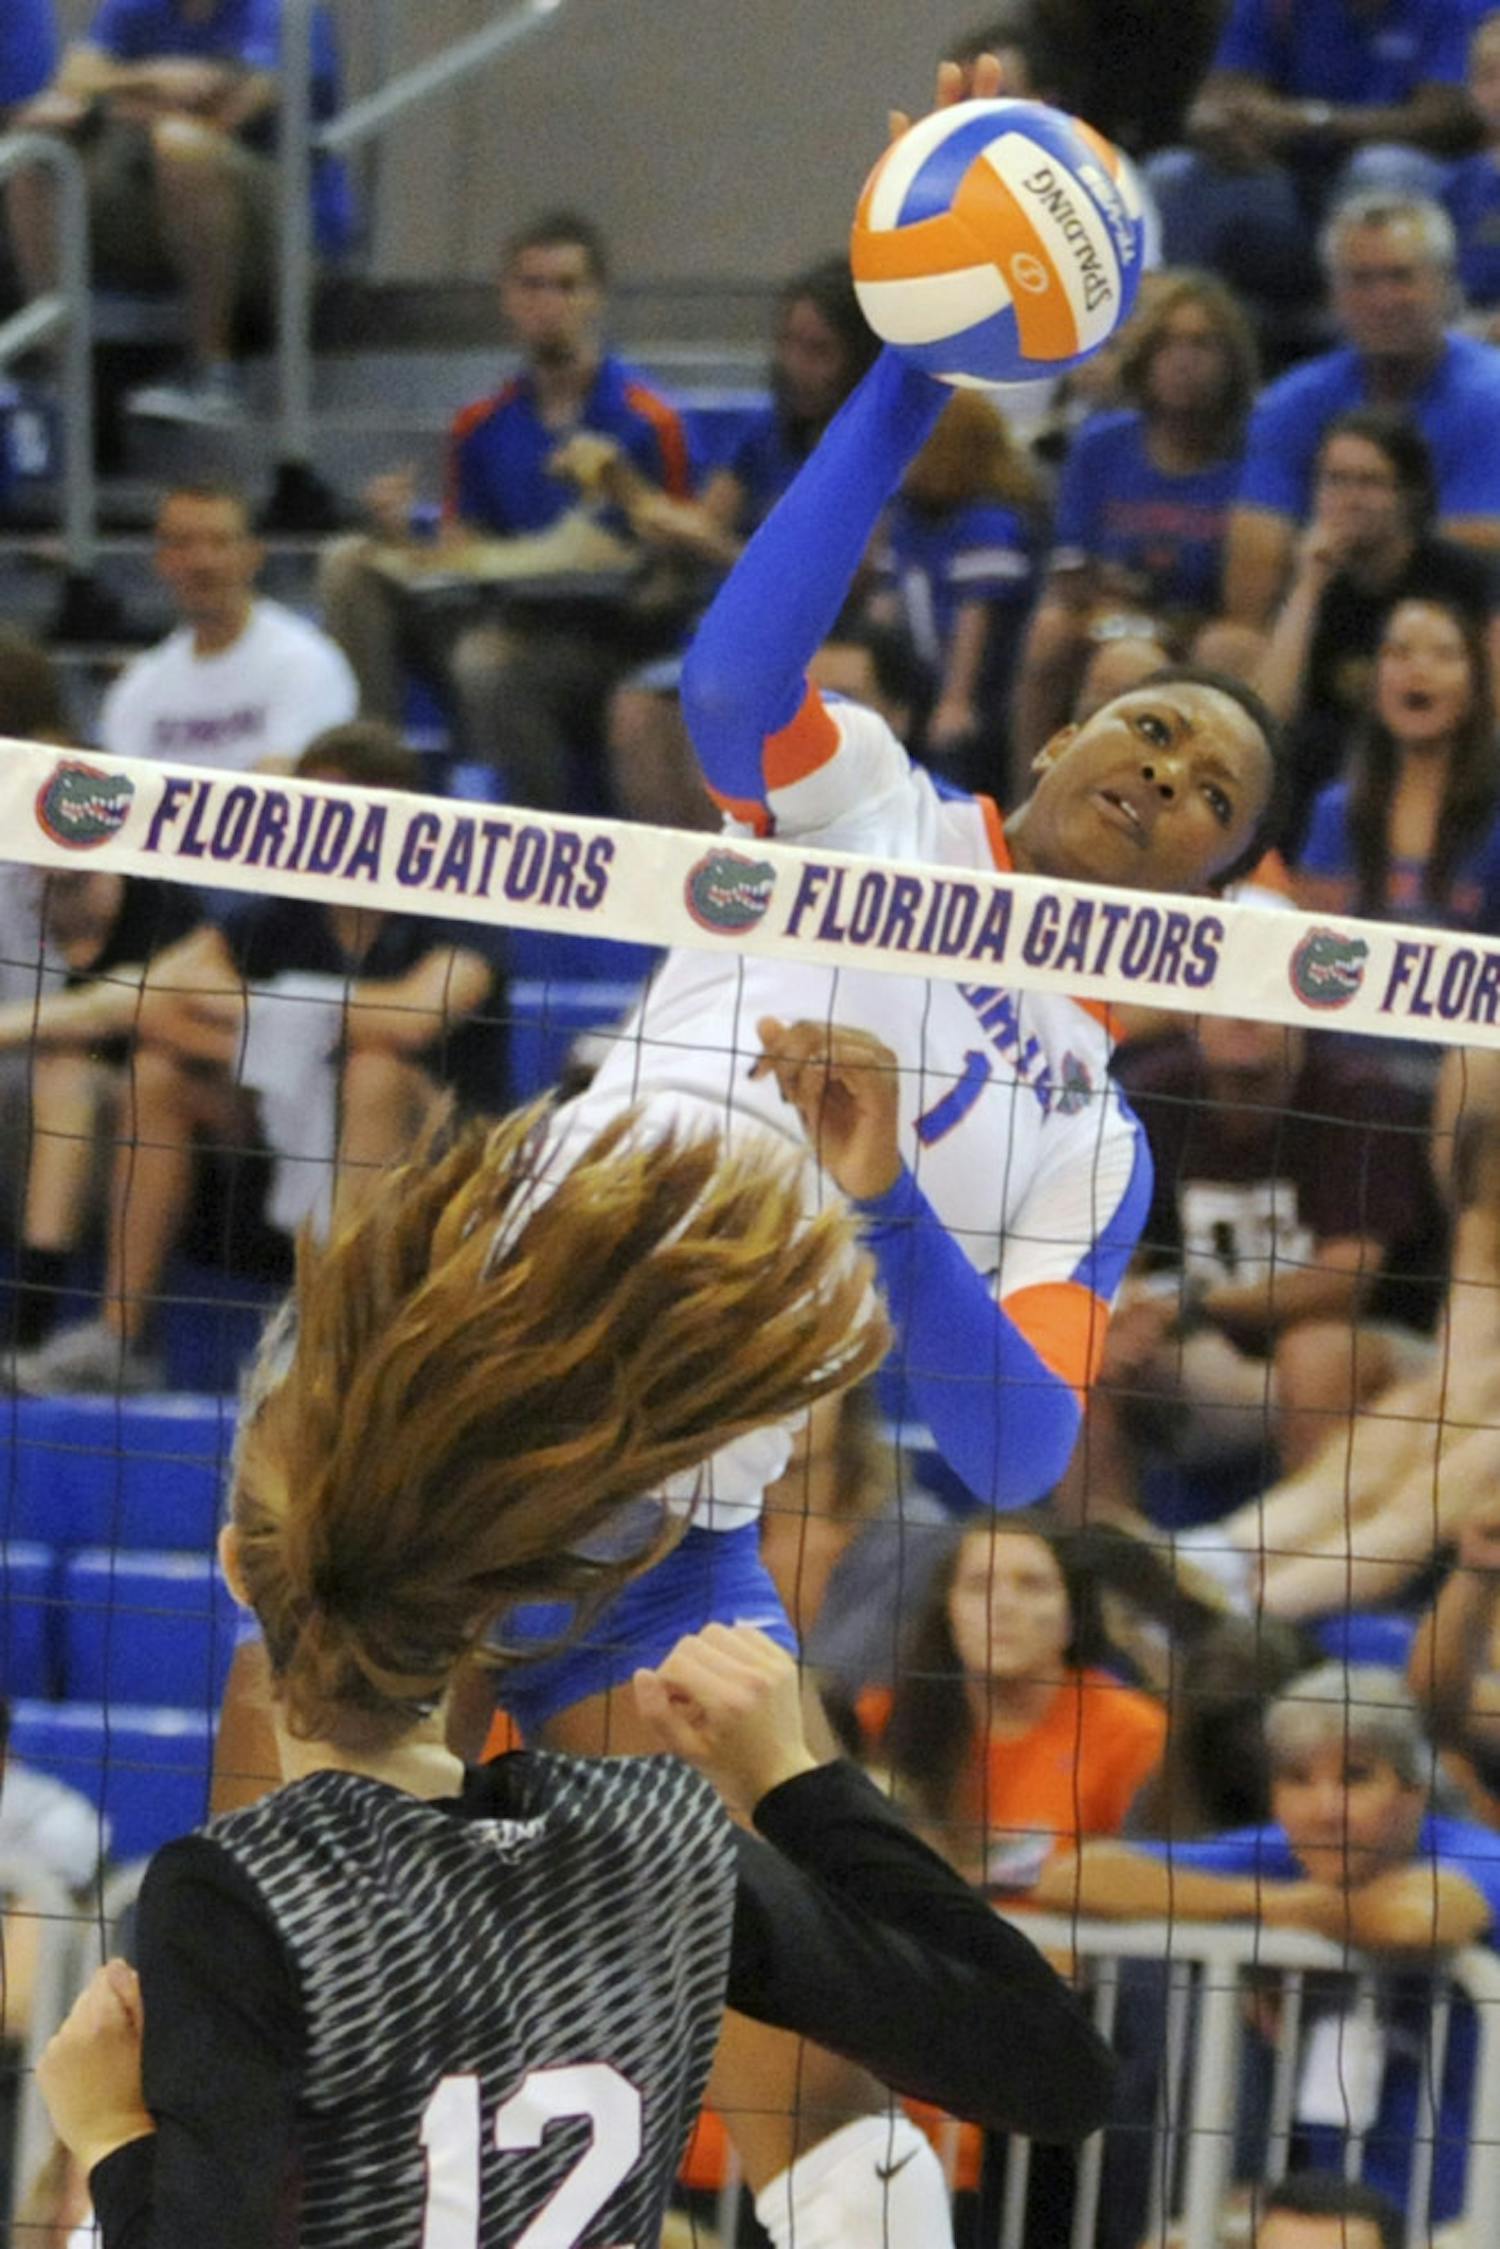 UF middle blocker Rhamat Alhassan swings for a kill attempt during Florida's 3-0 win against Texas A&amp;M on Oct. 3, 2015, in the O'Connell Center.